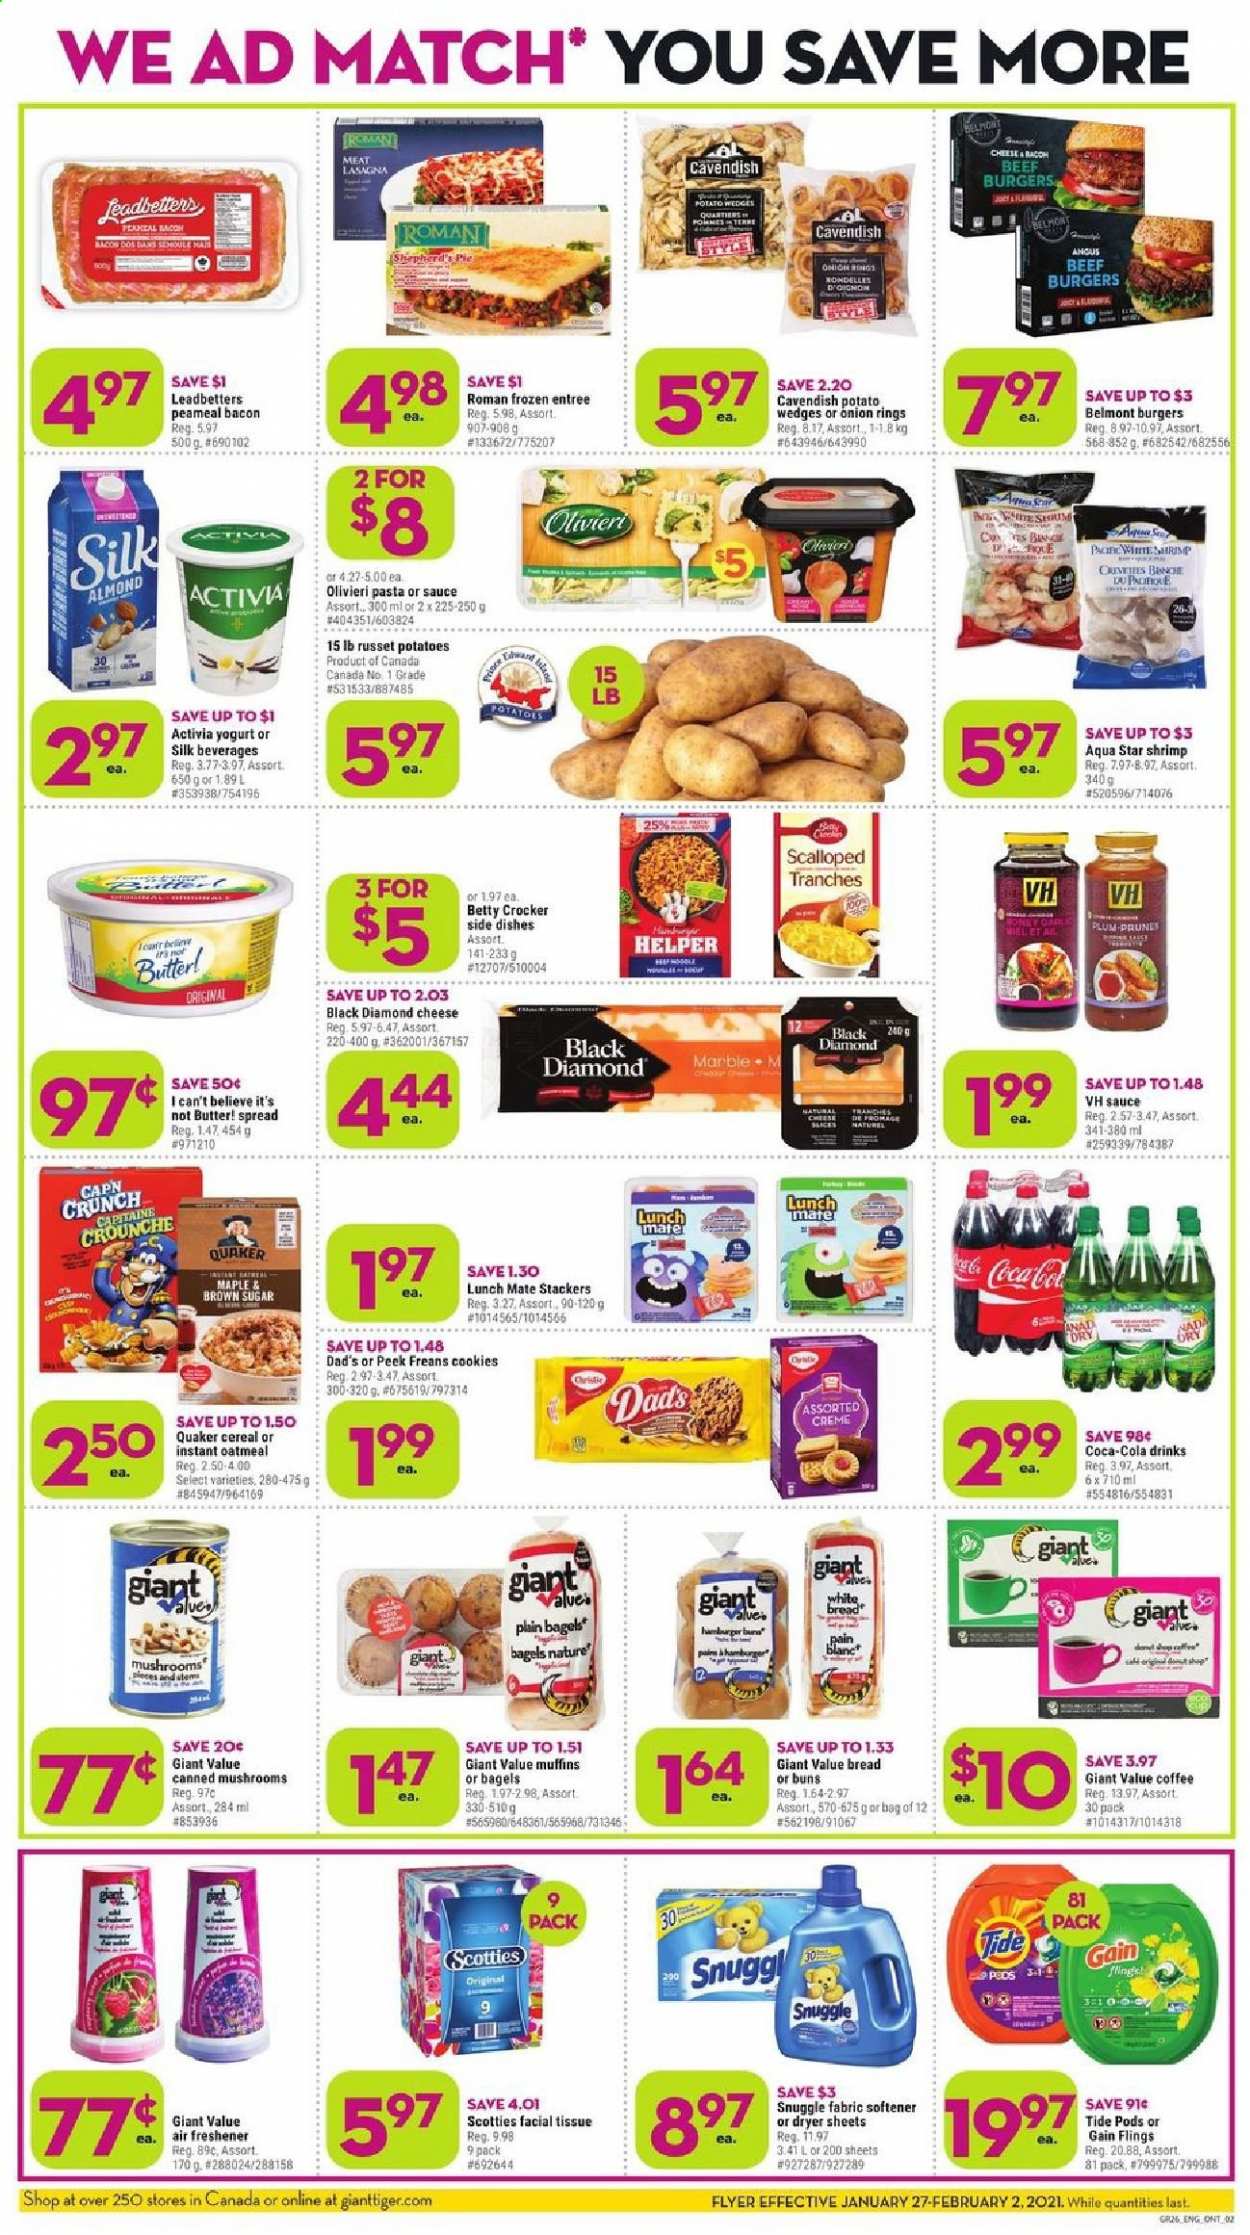 thumbnail - Giant Tiger Flyer - January 27, 2021 - February 02, 2021 - Sales products - bagels, bread, white bread, pie, buns, muffin, russet potatoes, potatoes, shrimps, onion rings, hamburger, Quaker, beef burger, lasagna meal, bacon, cheese, yoghurt, Activia, Silk, butter, I Can't Believe It's Not Butter, potato wedges, cookies, oatmeal, cereals, honey, prunes, dried fruit, Coca-Cola, coffee, tissues, Gain, Snuggle, Tide, fabric softener, dryer sheets, air freshener. Page 2.